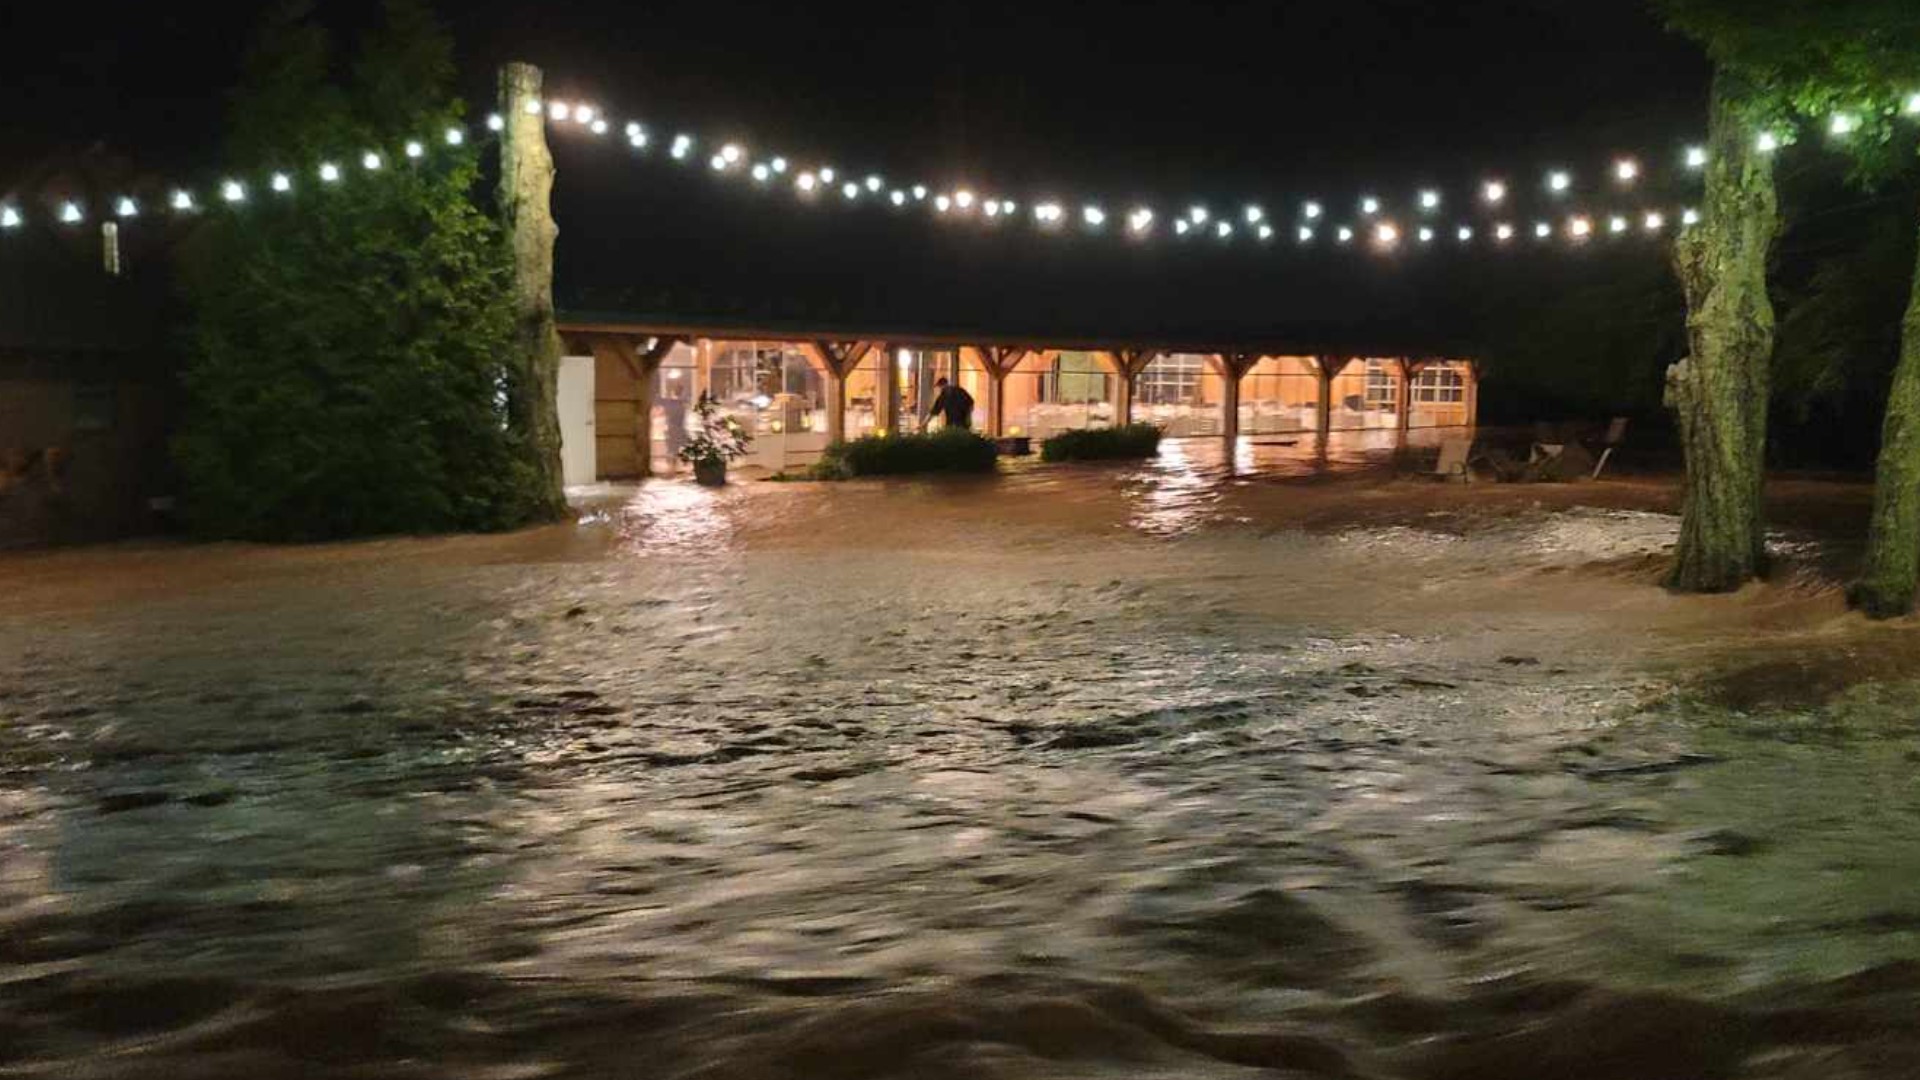 Video shows flood waters at the Beaumont Inn in Dallas, Pa., bringing a halt to a wedding reception during Saturday's severe weather. CREDIT: Tila Paris Angley